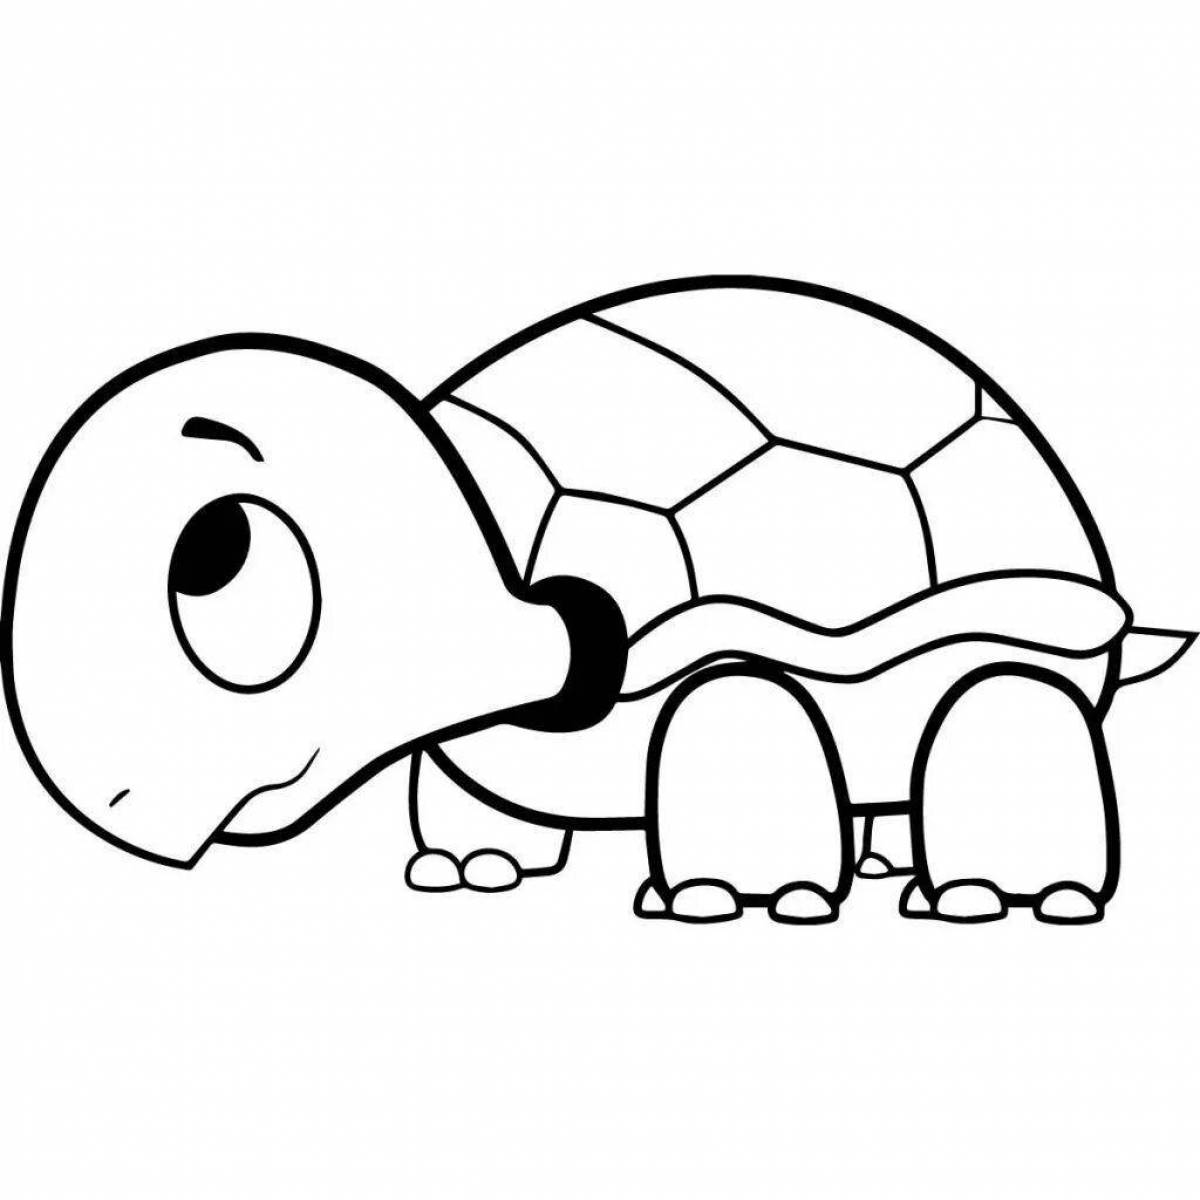 Sparkling cute turtle coloring page